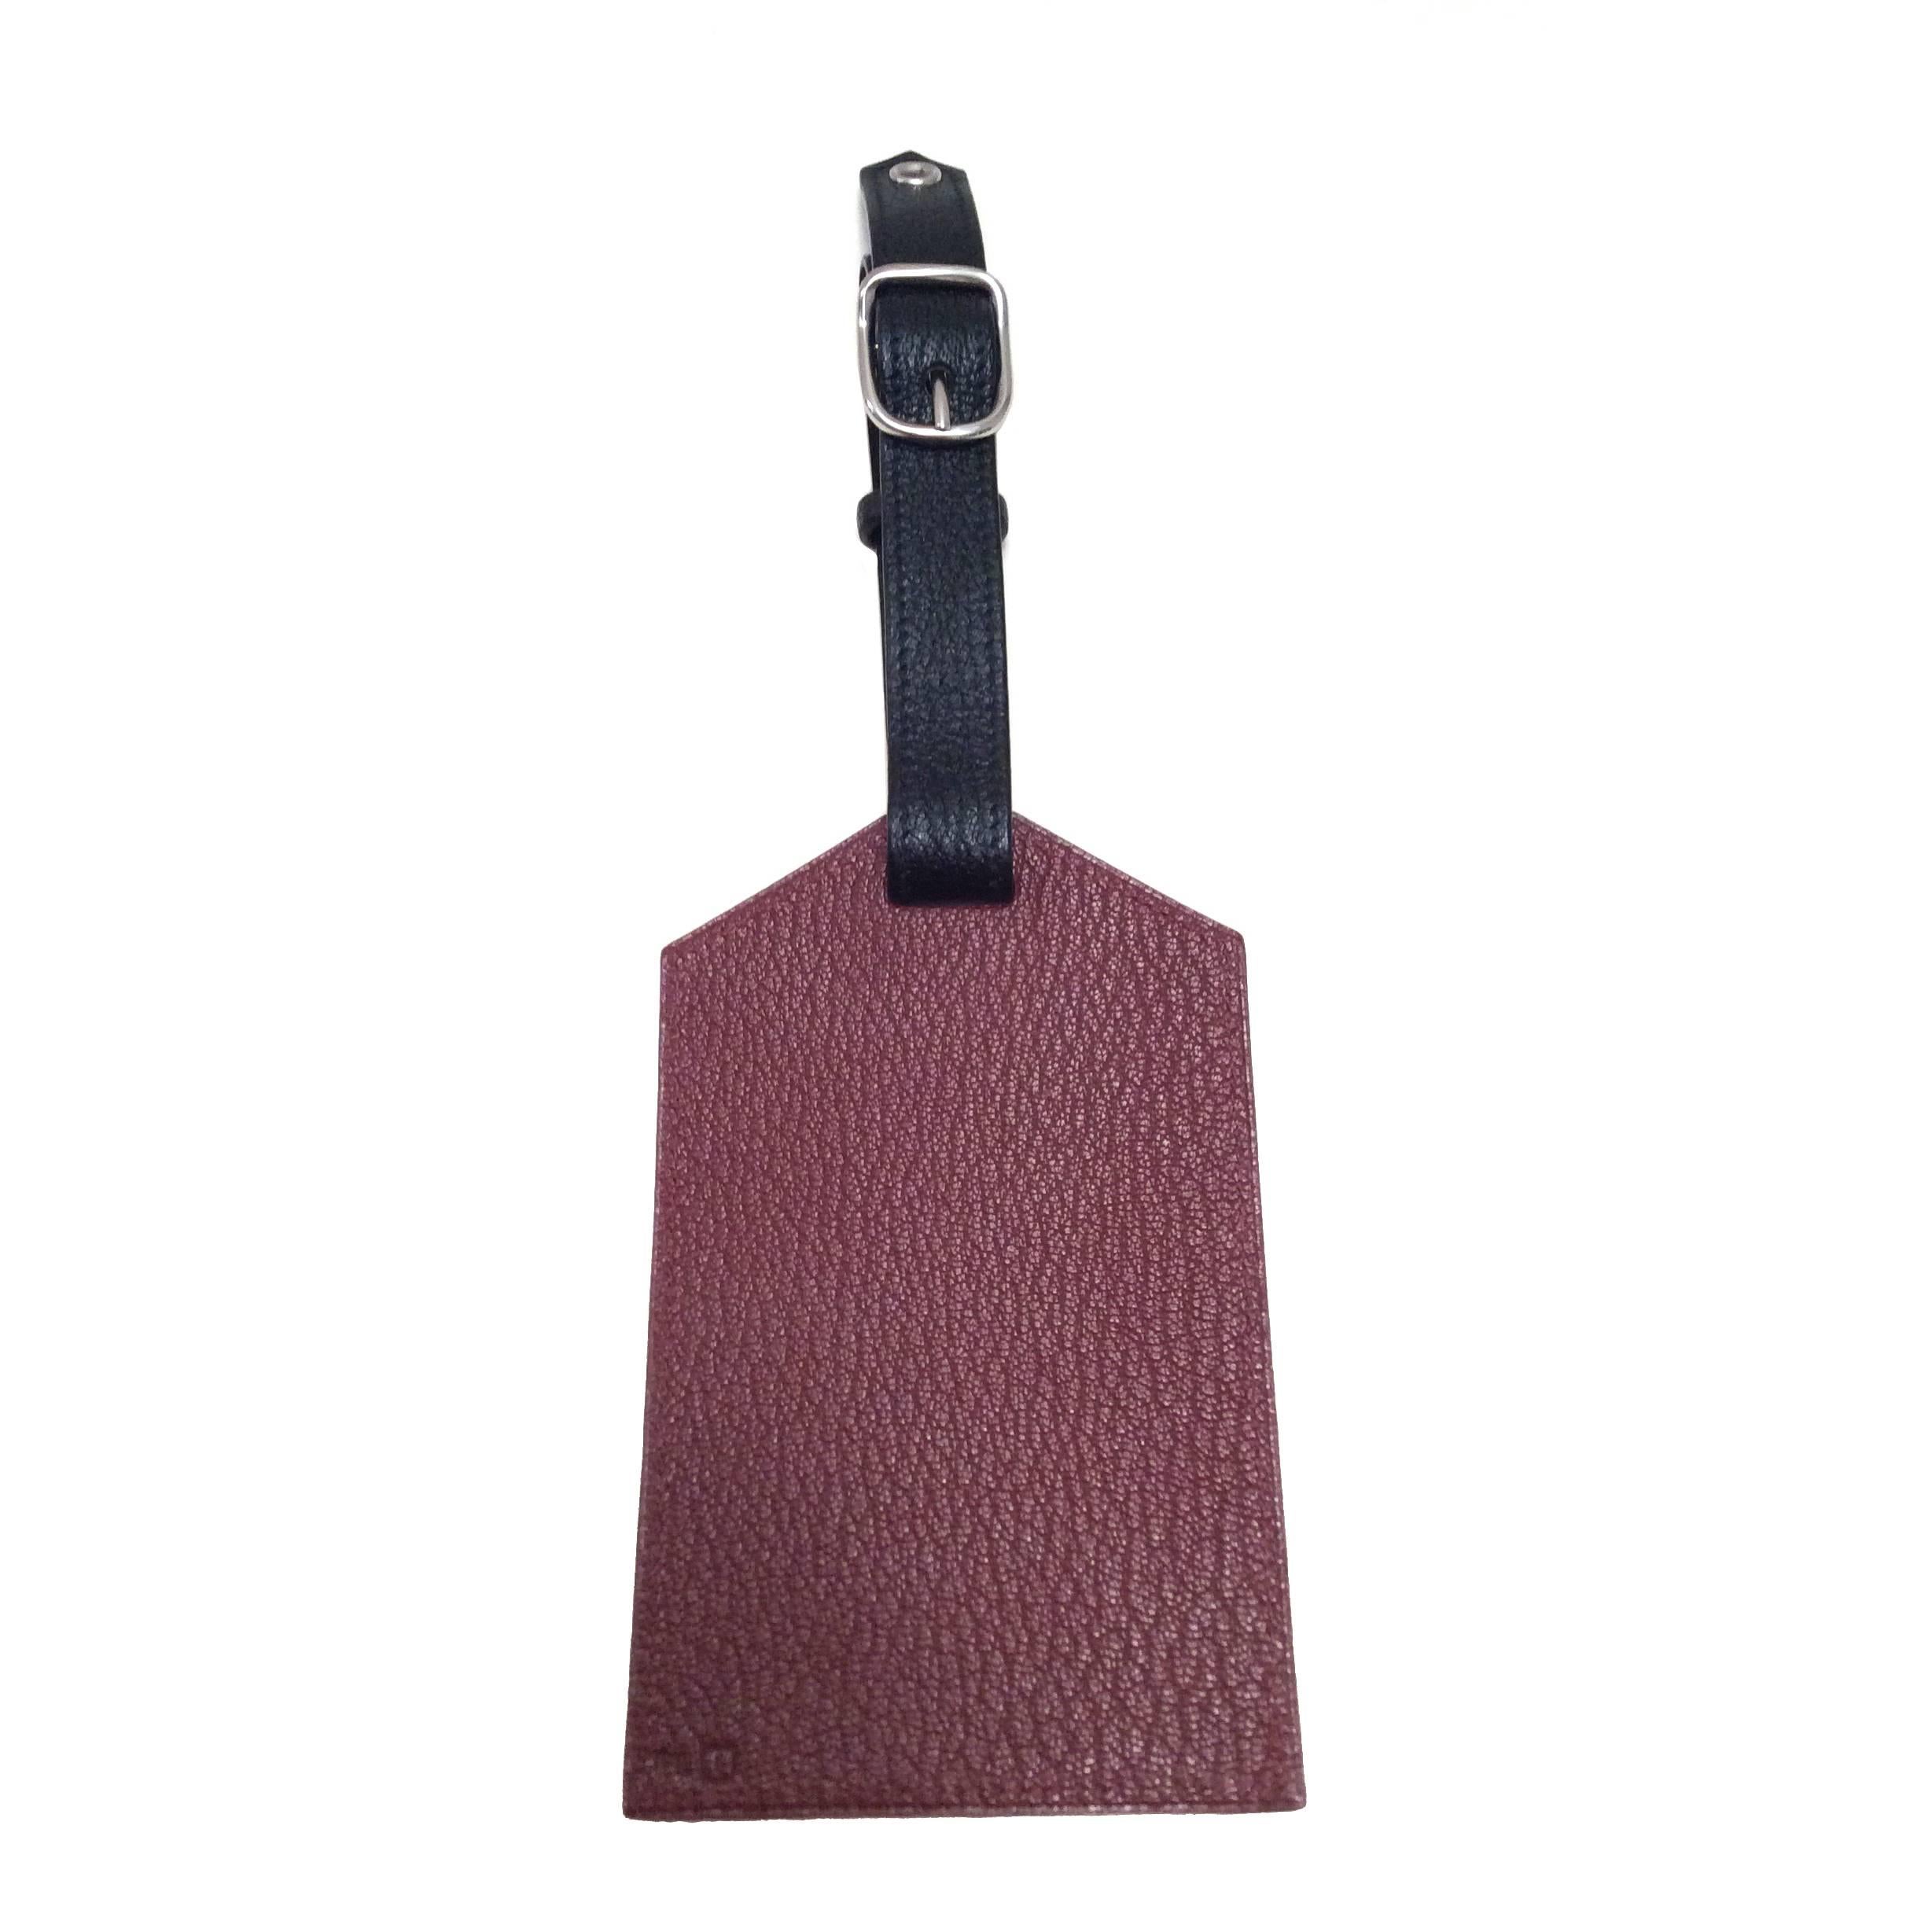 New Hermes Luggage Tag / Bag Charm - Red and Black For Sale